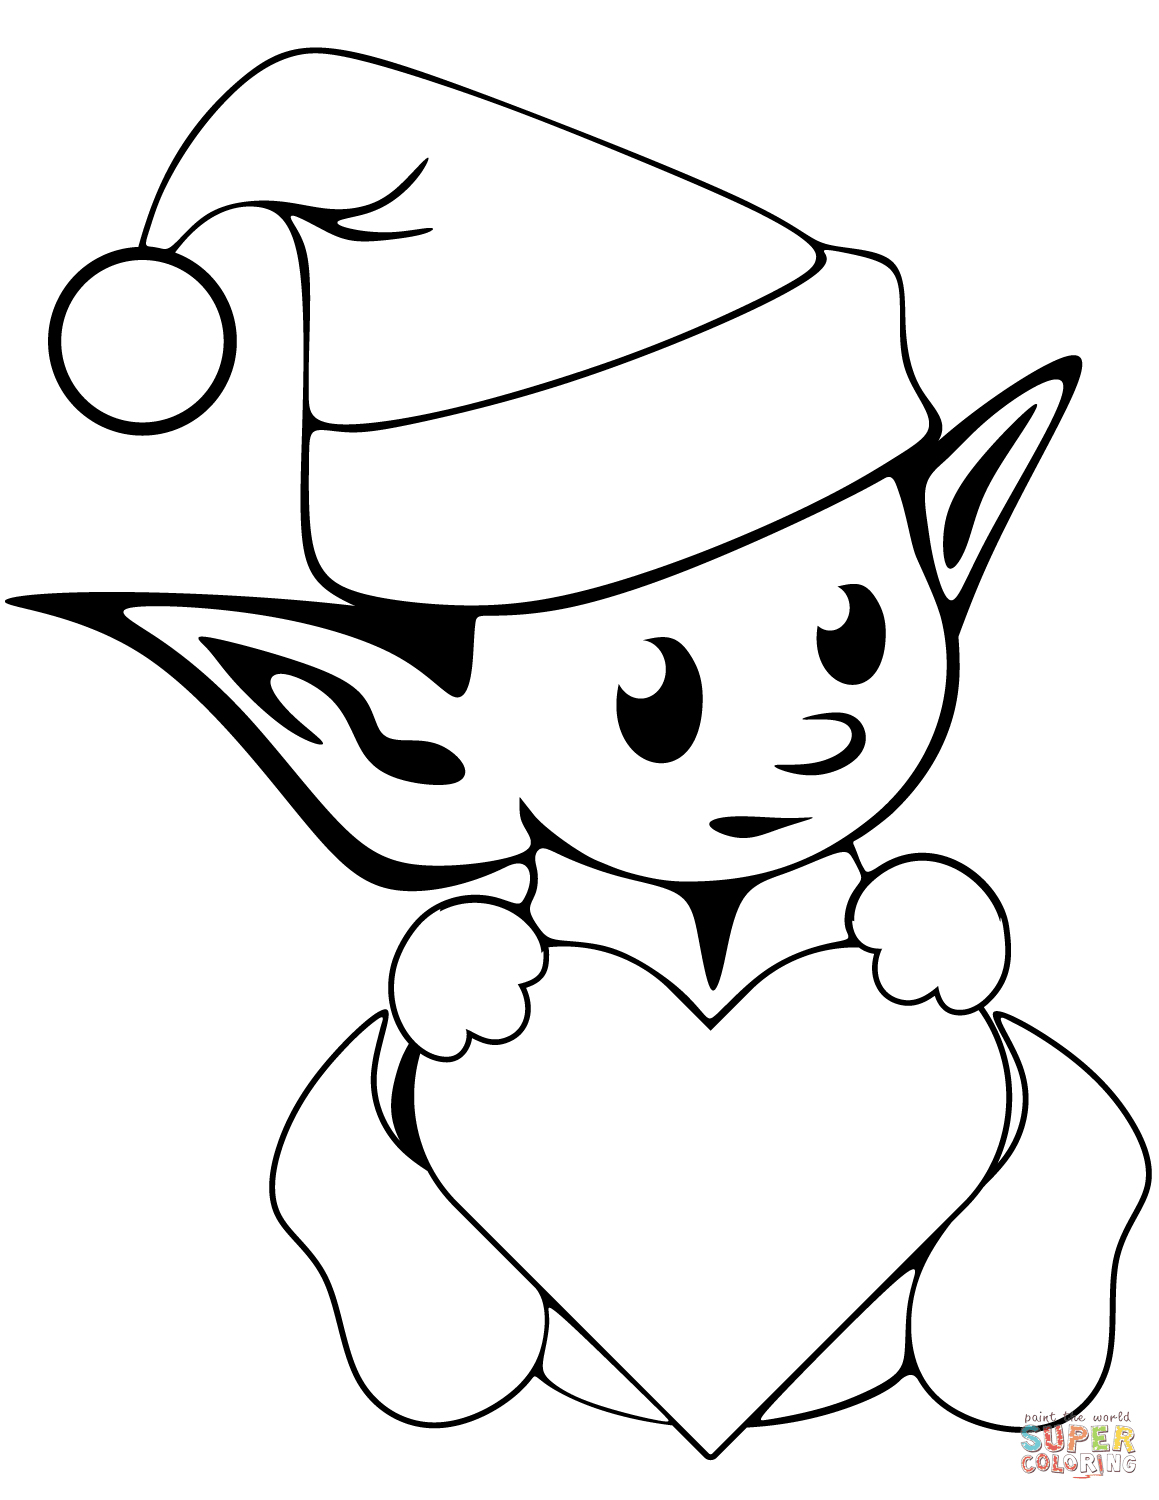 elf-on-the-shelf-drawing-free-download-on-clipartmag